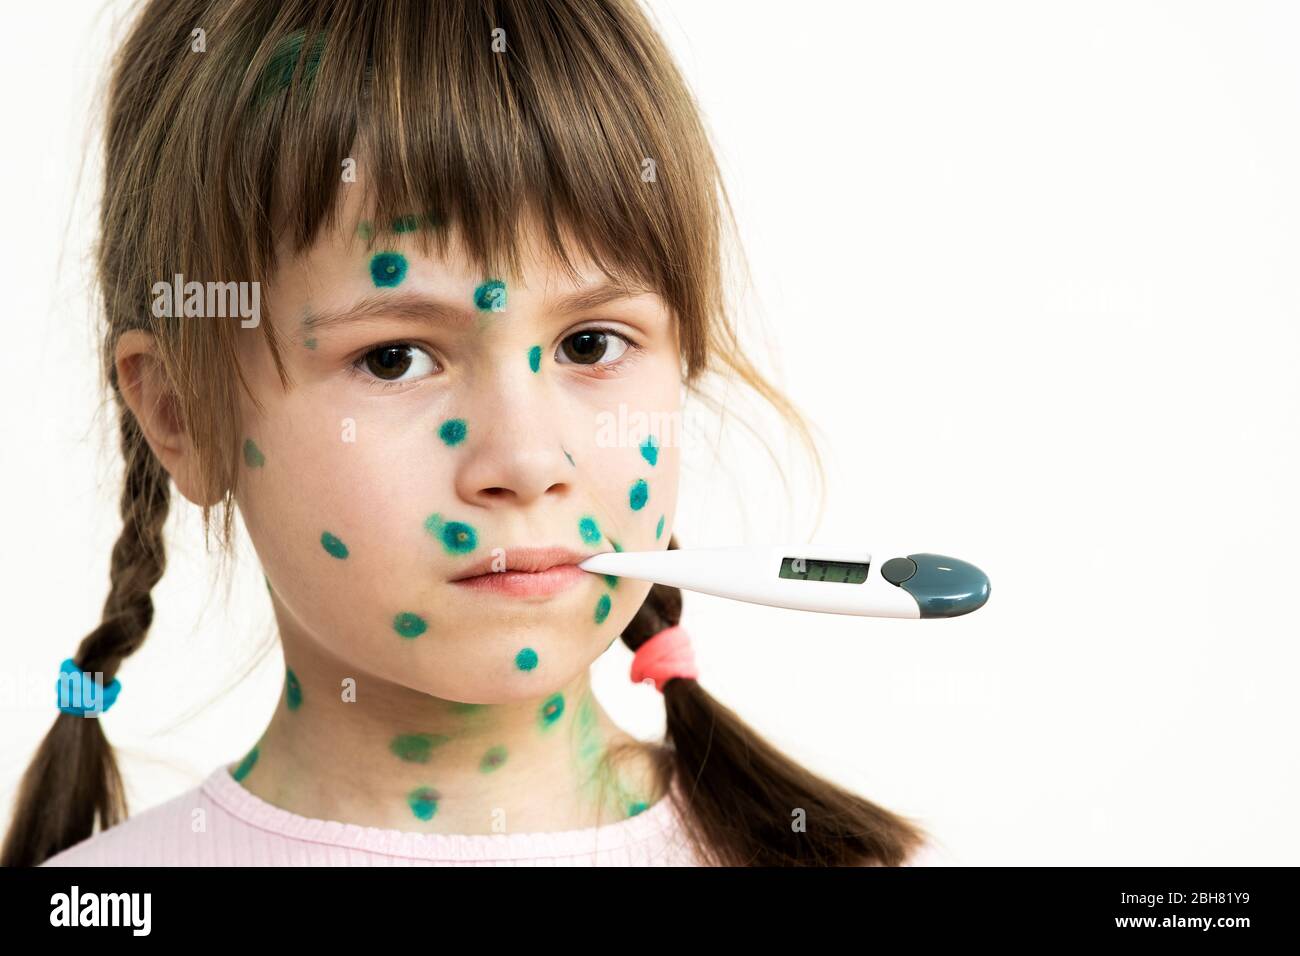 Child girl covered with green rashes on face ill with chickenpox, measles or rubella virus holding medical thermometer in her mouth having high temper Stock Photo